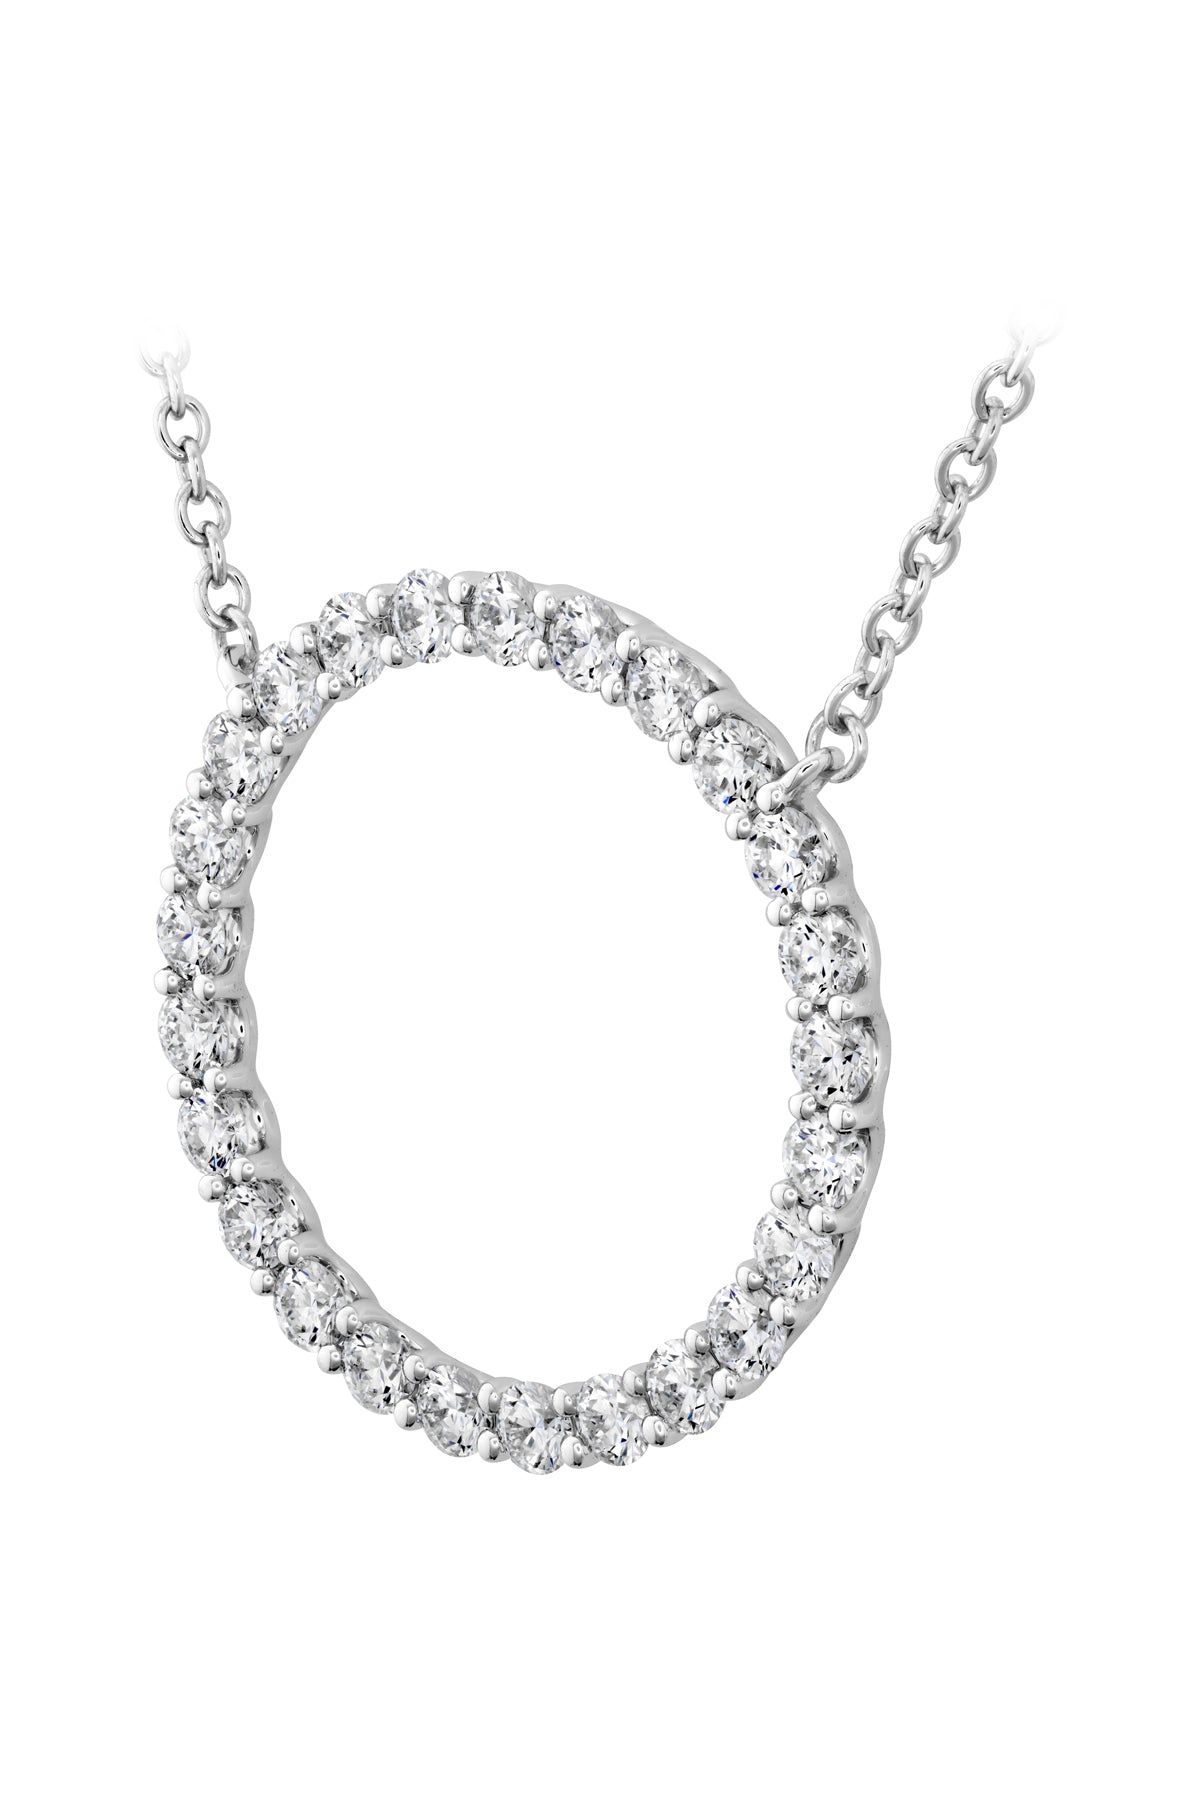 Large Signature Circle Pendant From Hearts On Fire available at LeGassick Diamonds and Jewellery Gold Coast, Australia.